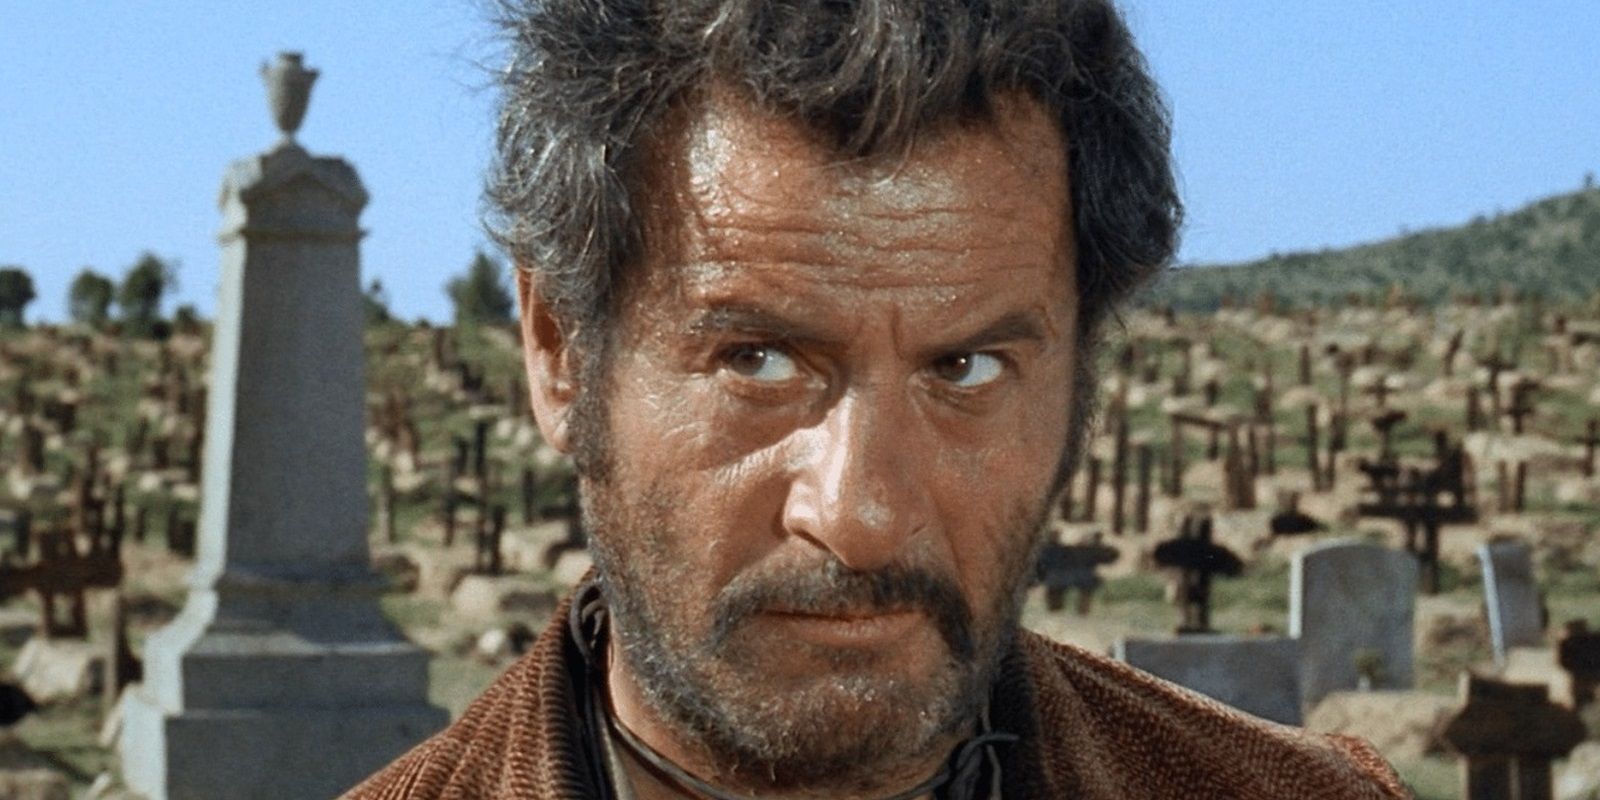 Eli Wallach in a graveyard in The Good, the Bad, and the Ugly